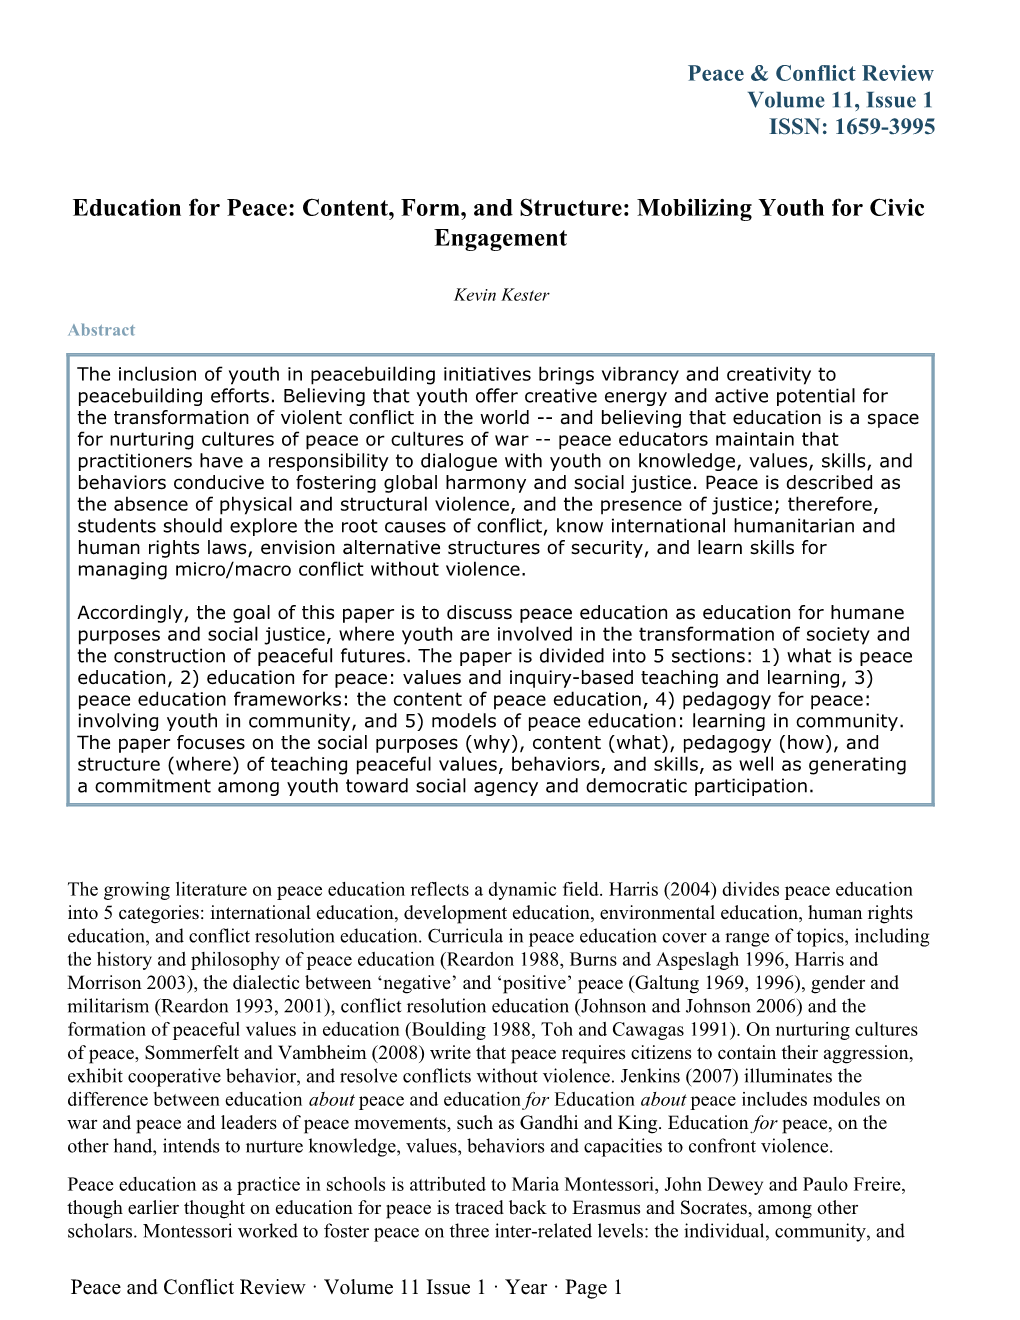 Education for Peace: Content, Form, and Structure: Mobilizing Youth for Civic Engagement